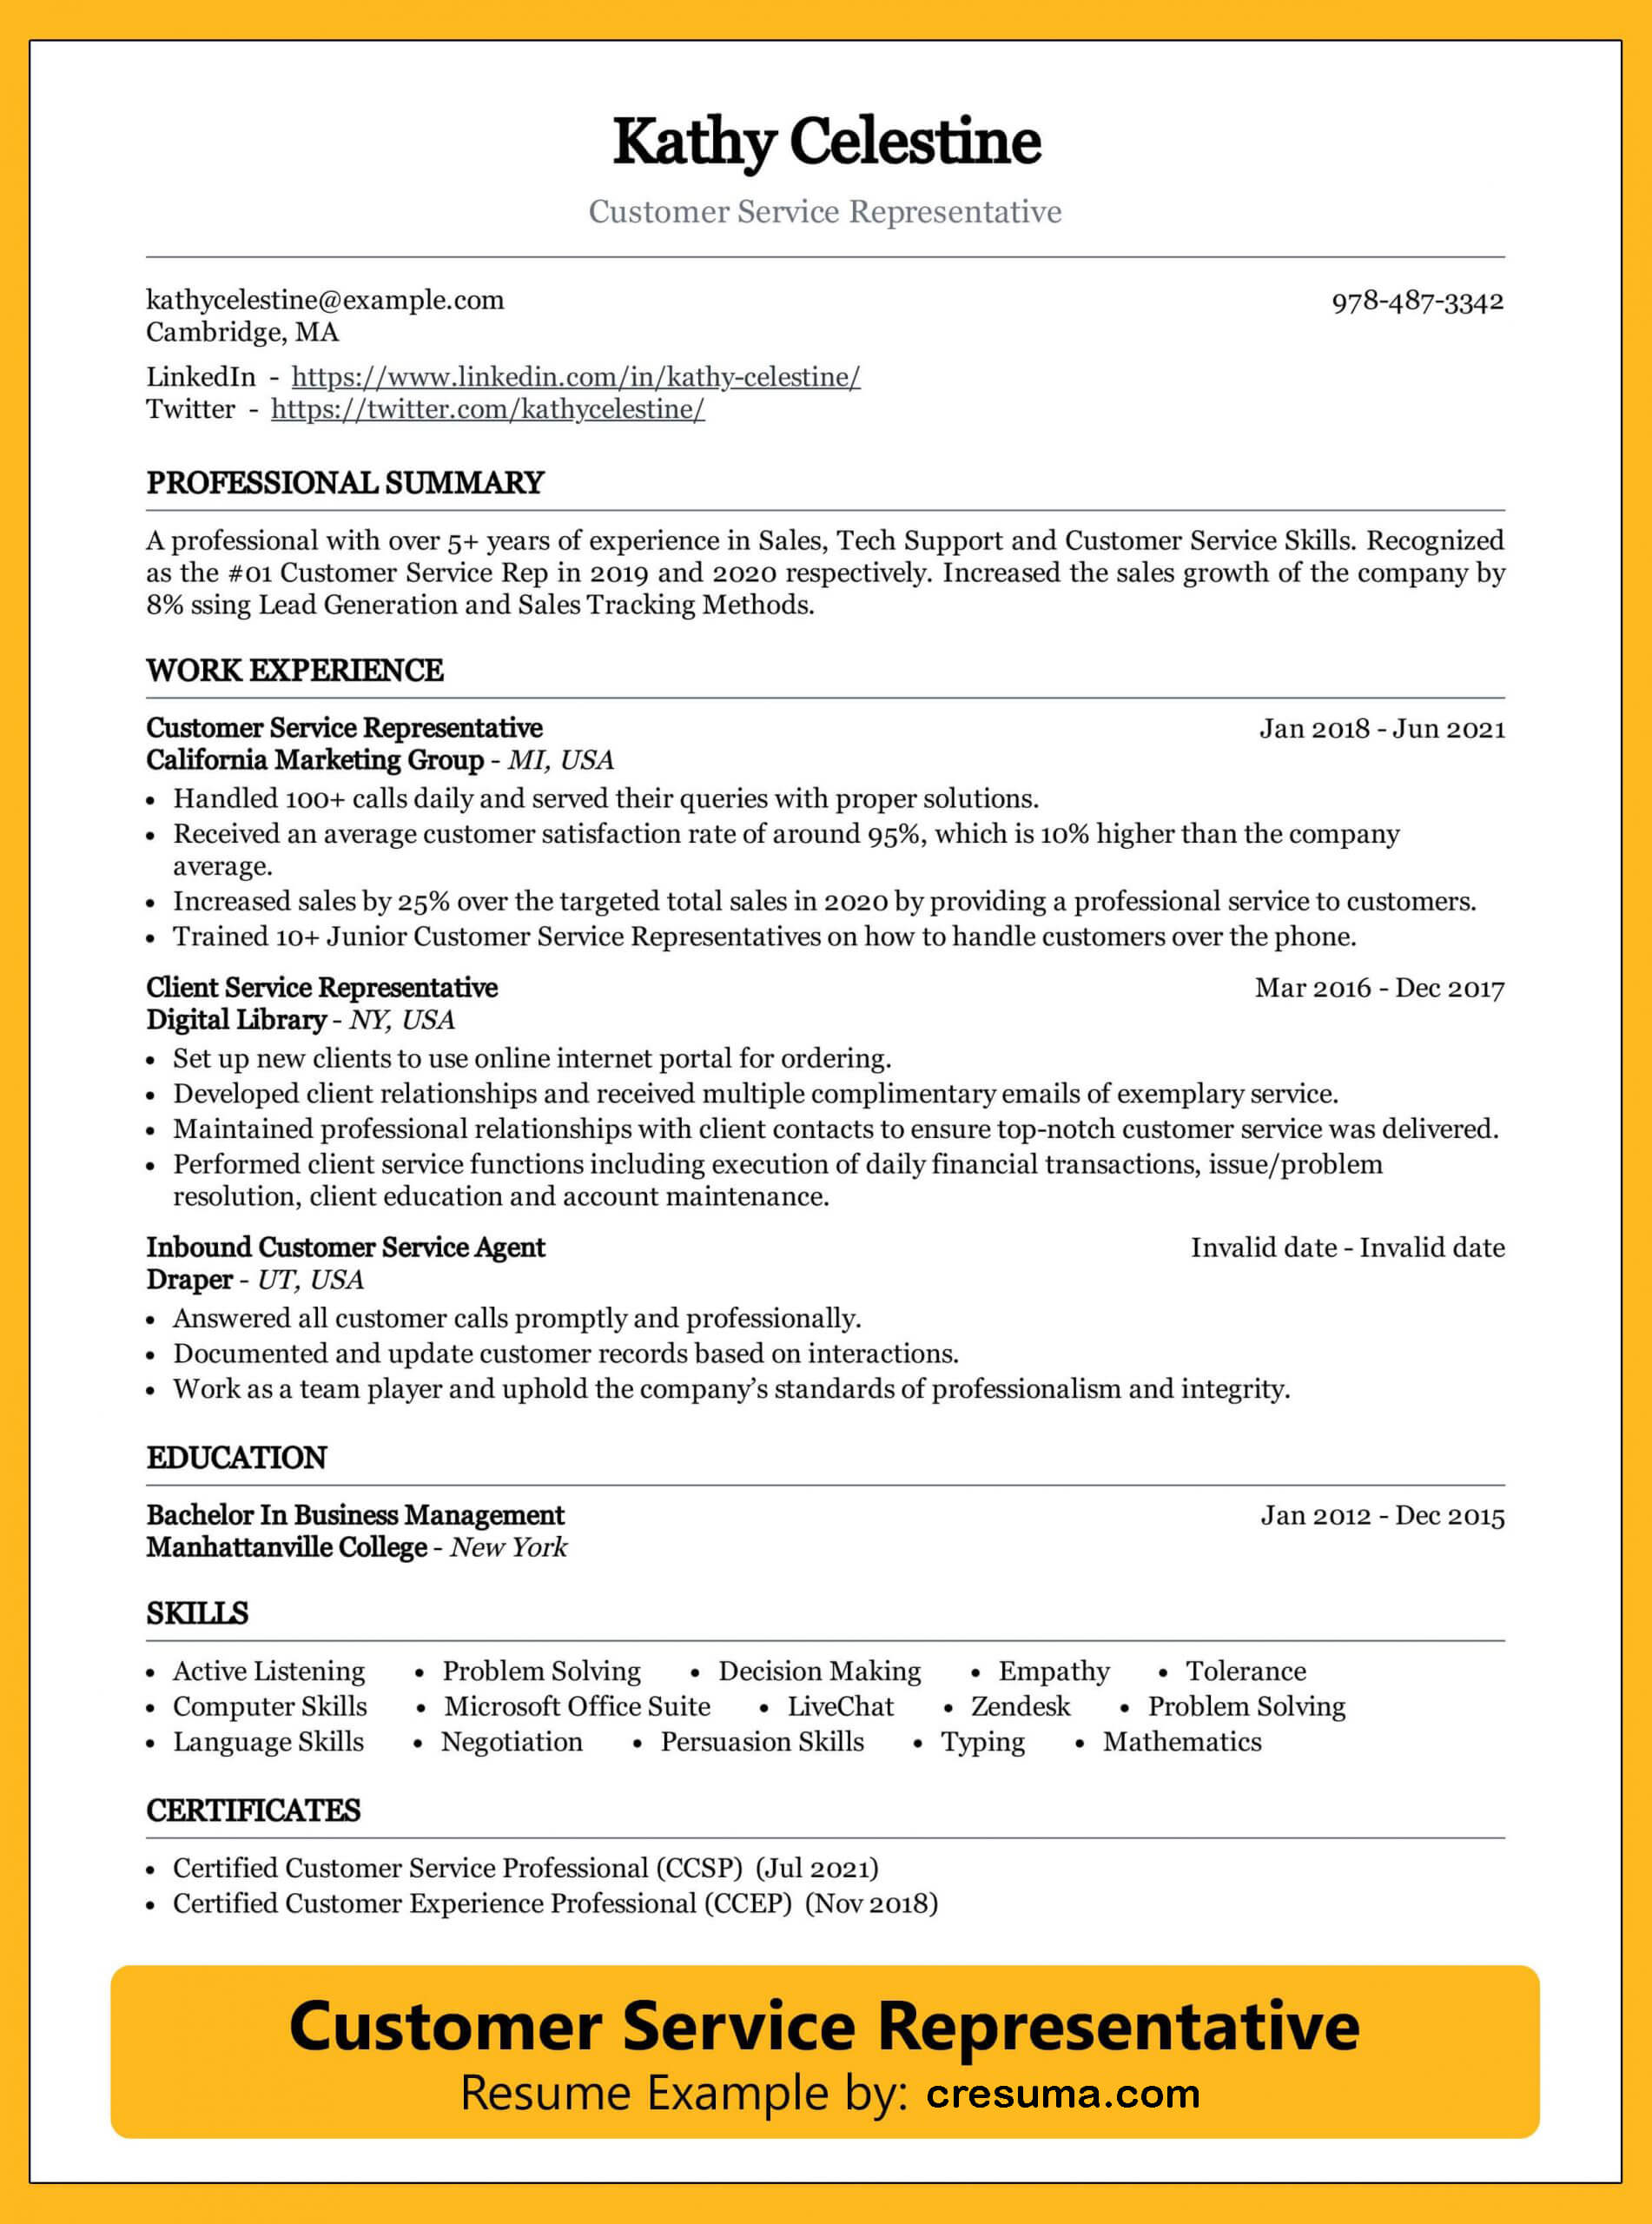 Customer Service Representative Resume Guide with examples